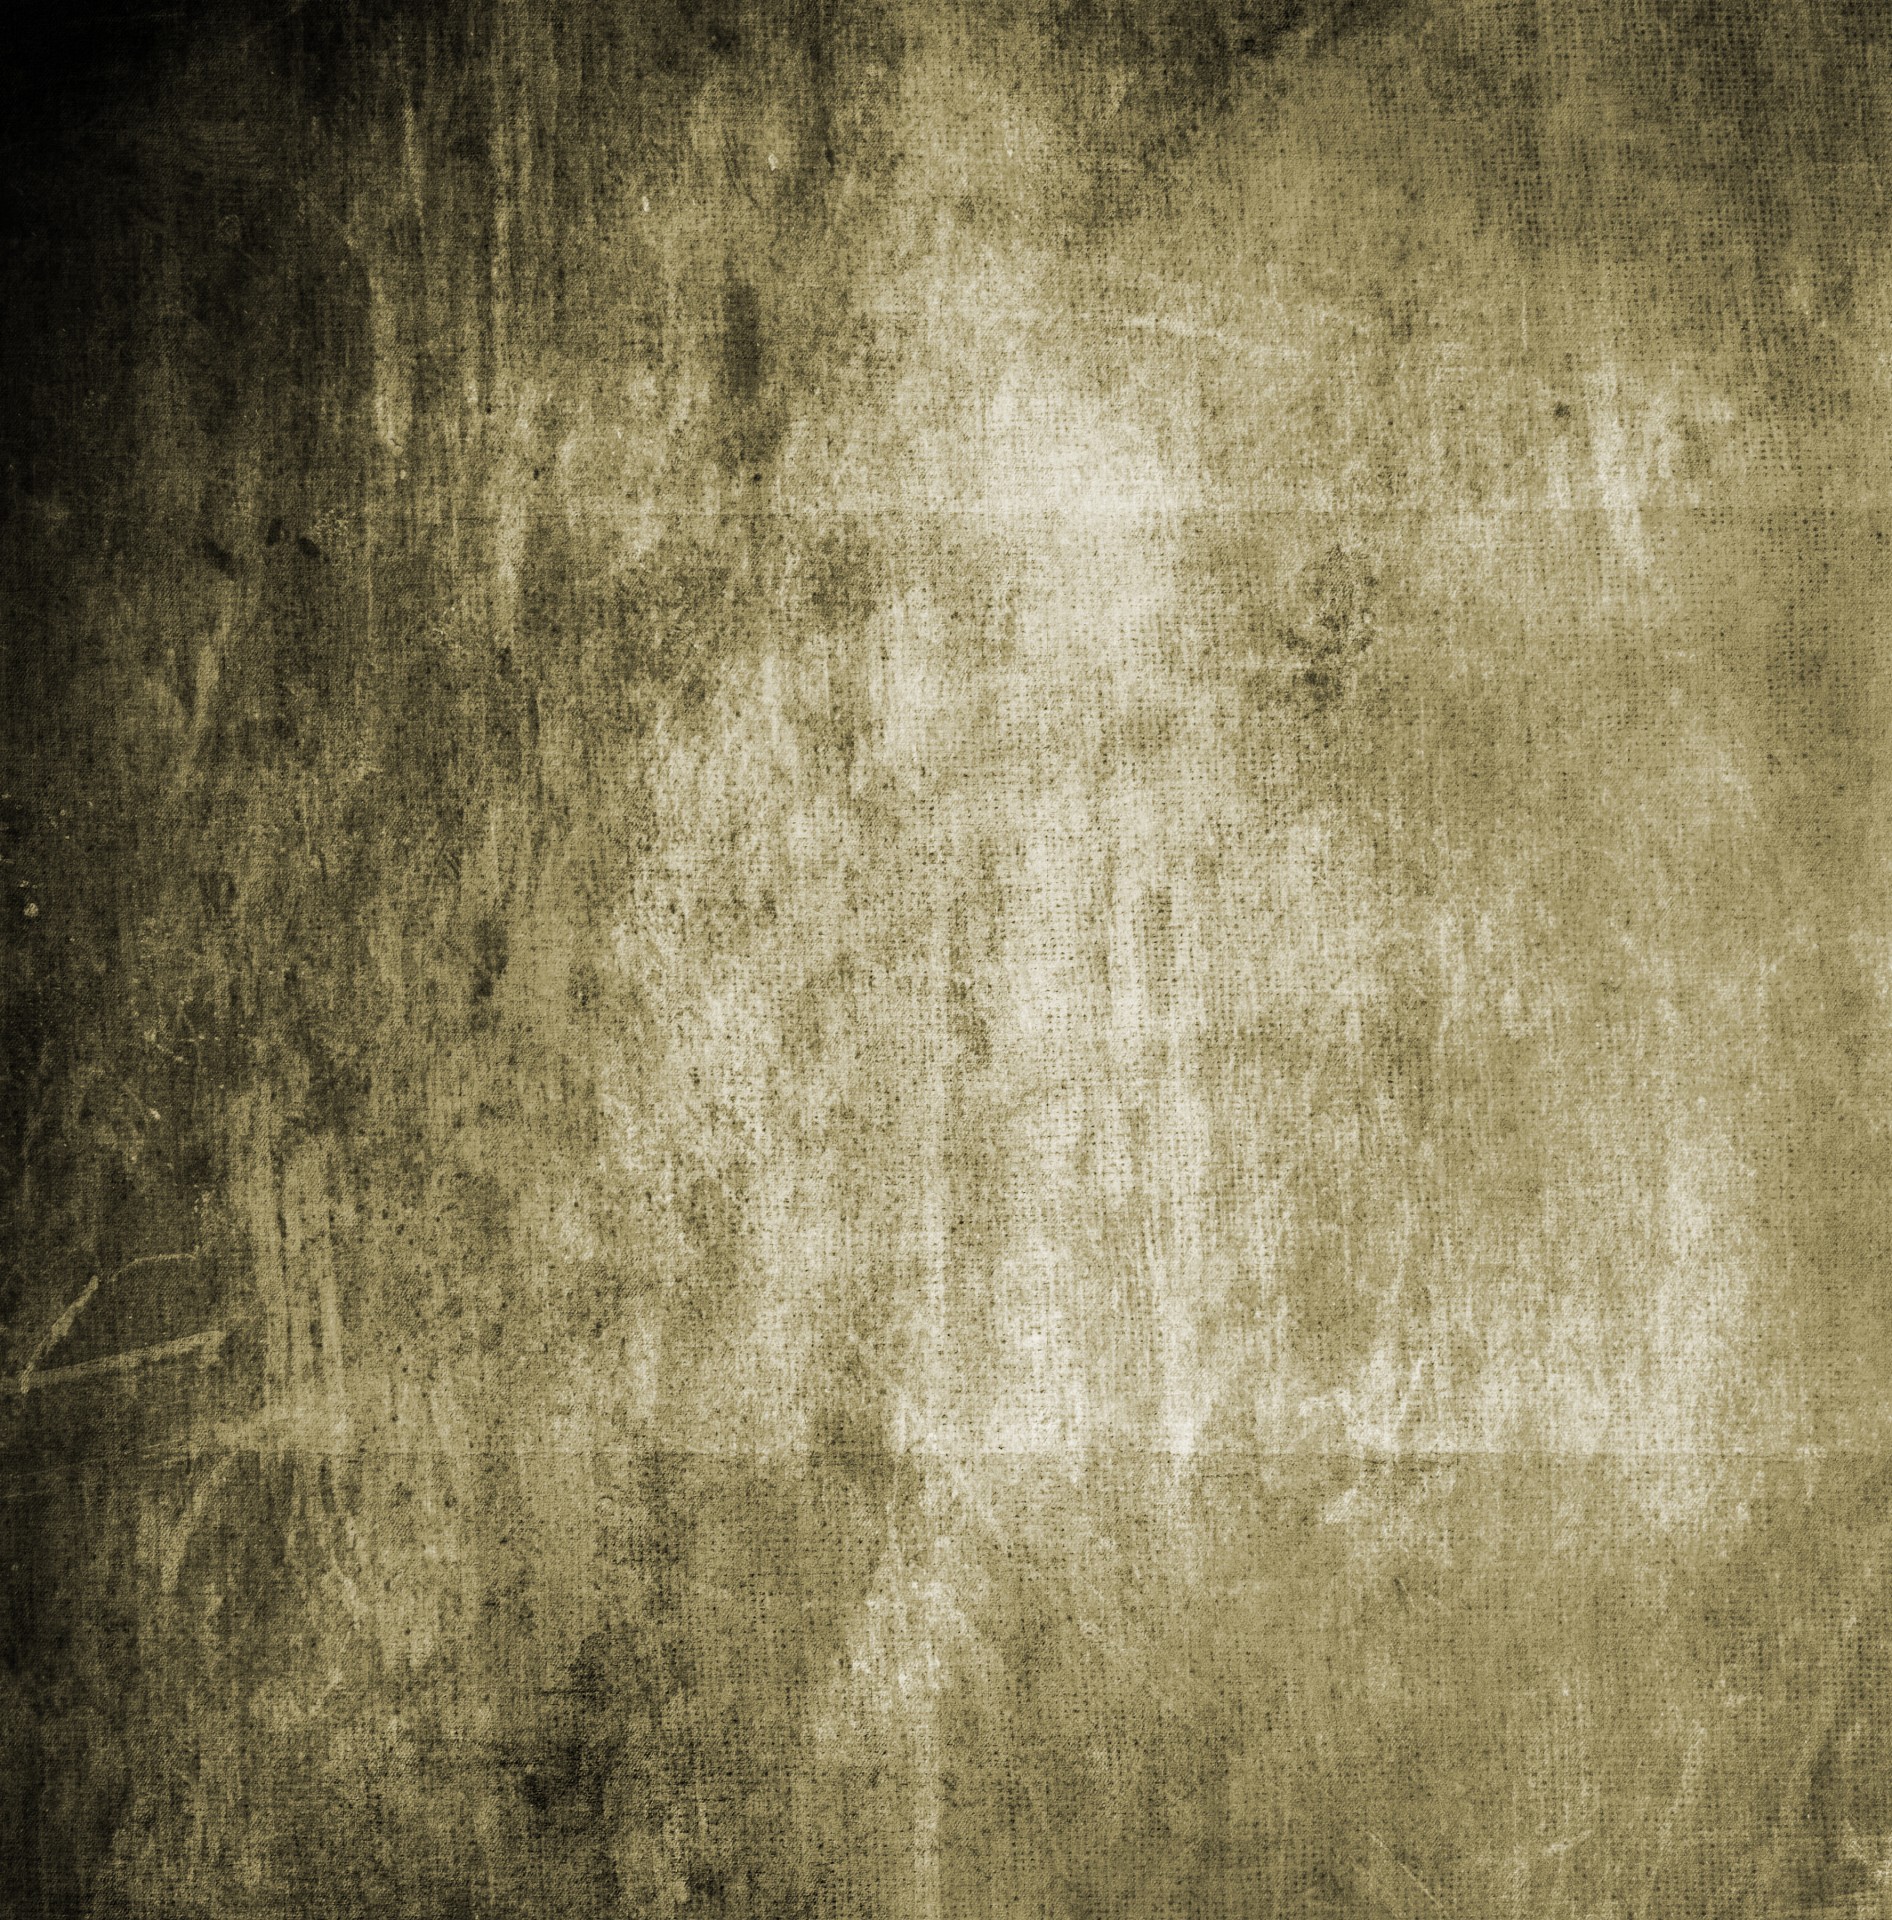 Dirty old grunge distressed background